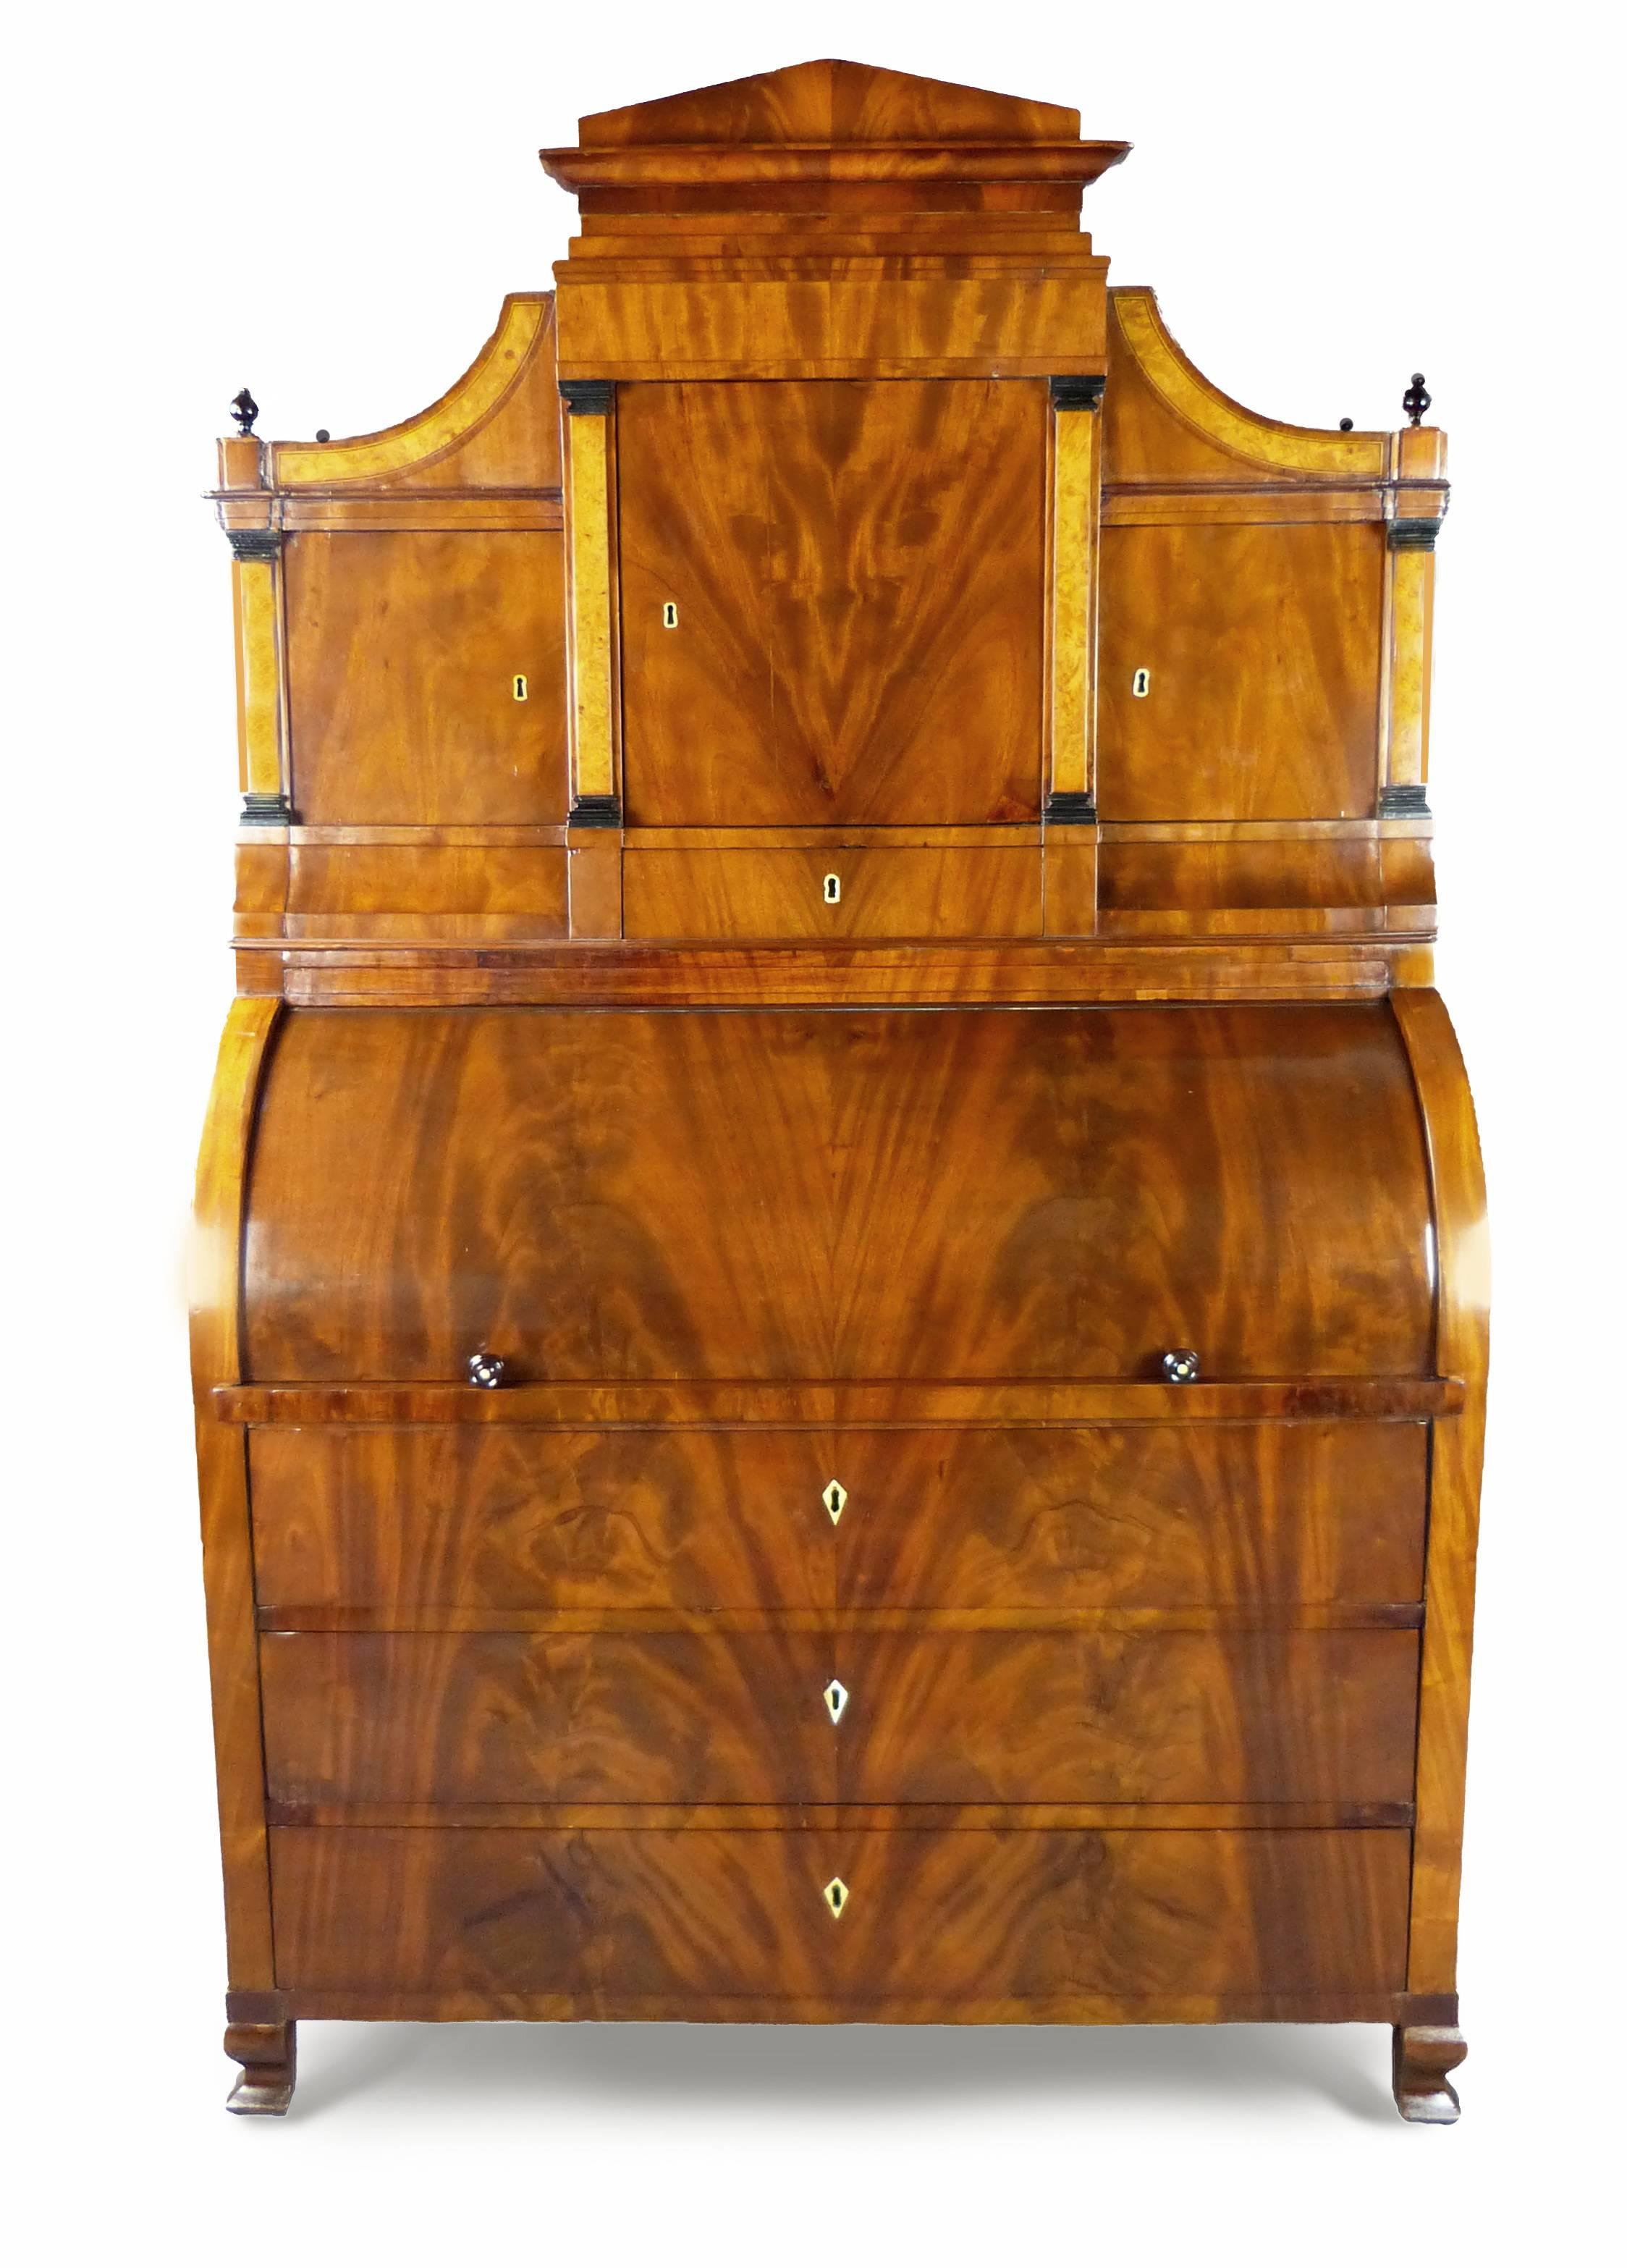 Fine and iconic figured mahogany Biedermeier cylinder bureau/secretaire with architectural top consisting of a central door flanked by two further doors all with applied birds eye maple columns with ebony capitals and drawers below, two of them